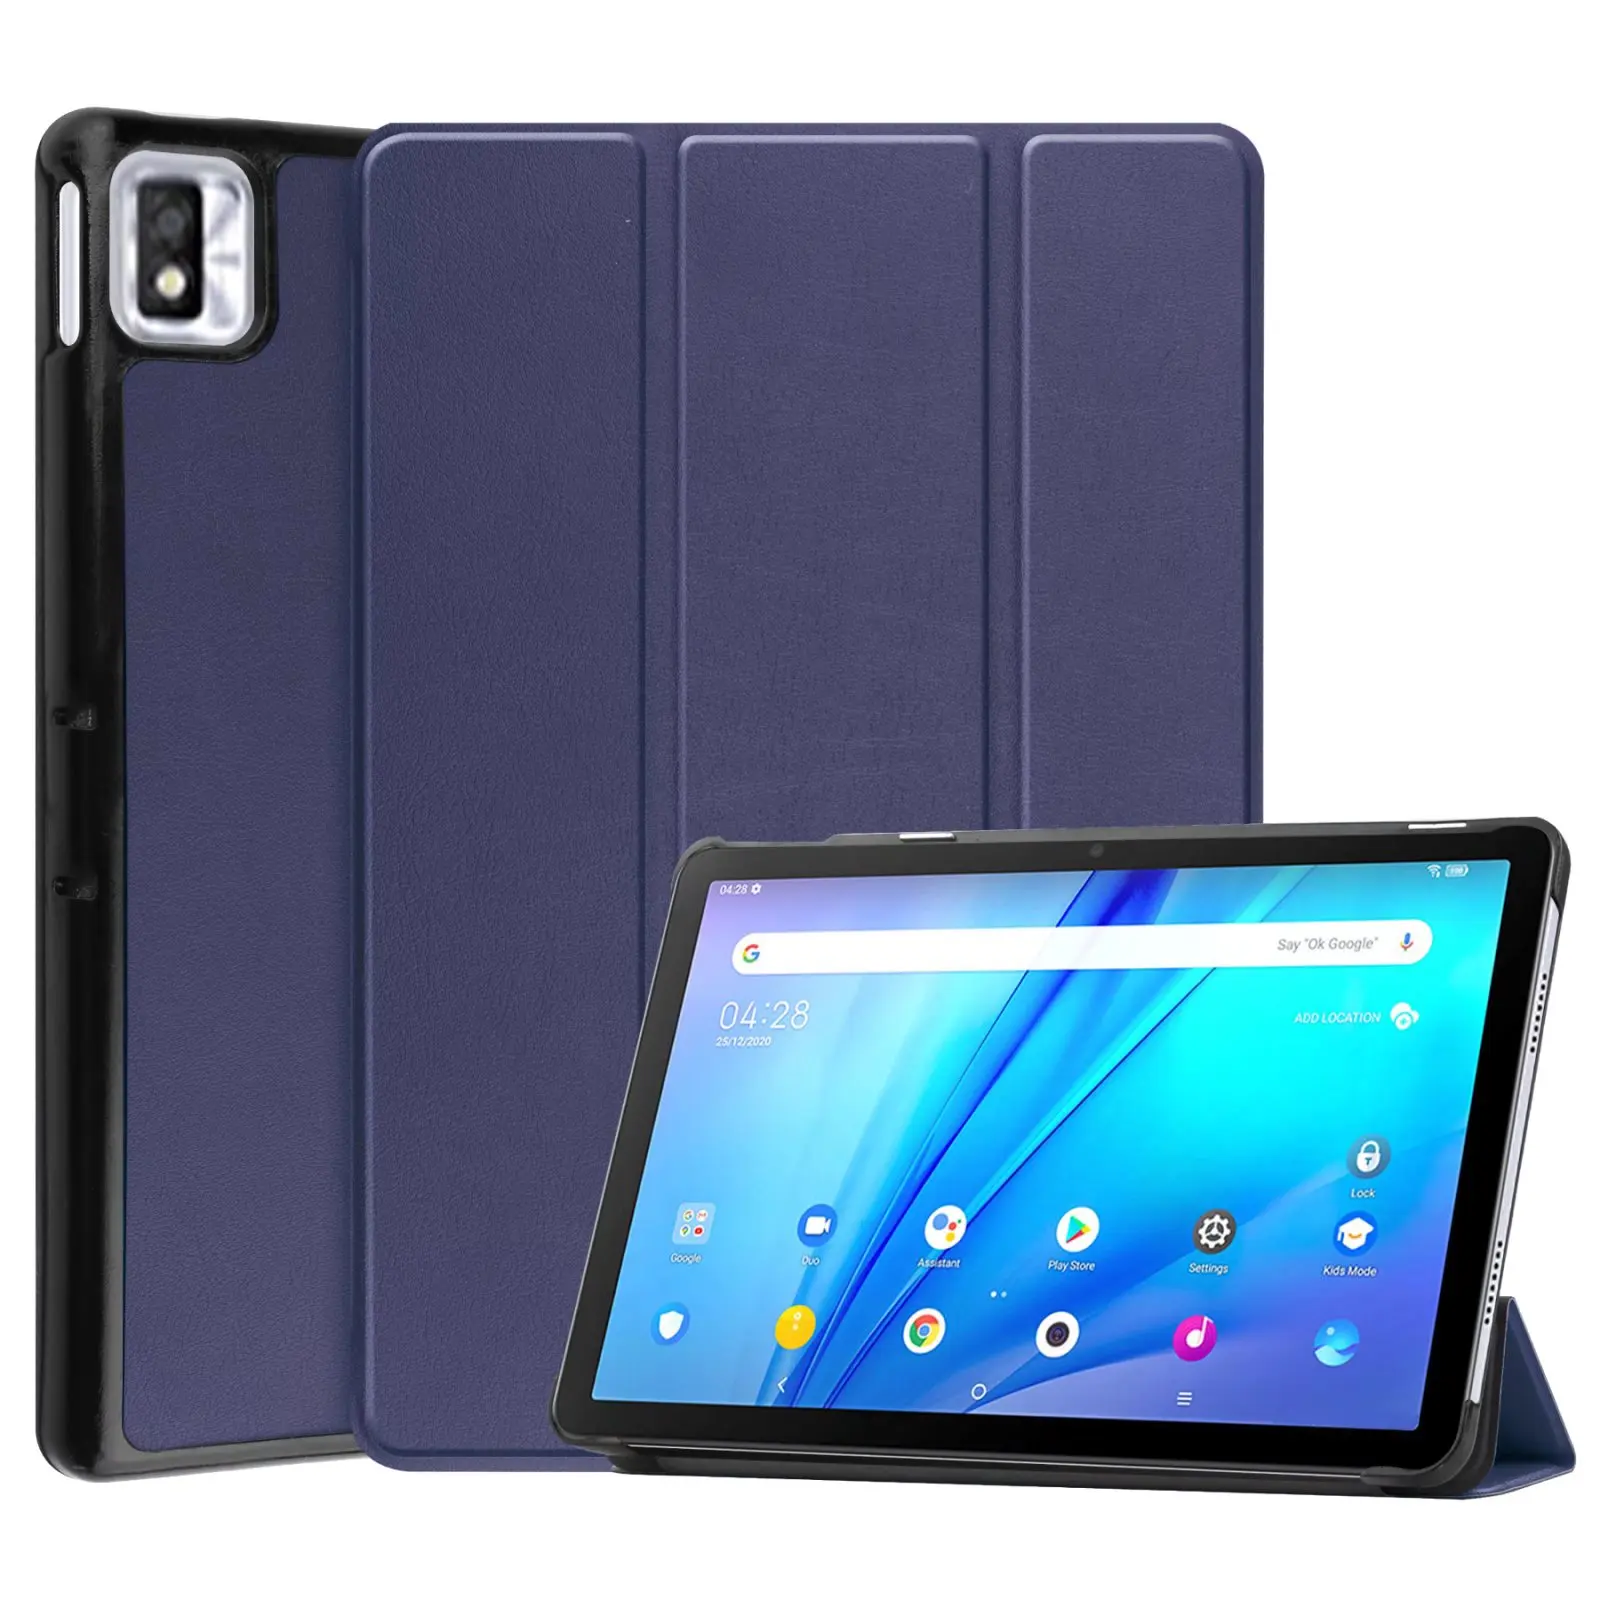 

Tri-folded Magnetic Funda For TCL Tab 10s 9080G Smart Tablet Cover Awake-Sleep Case with Hard Back Shell